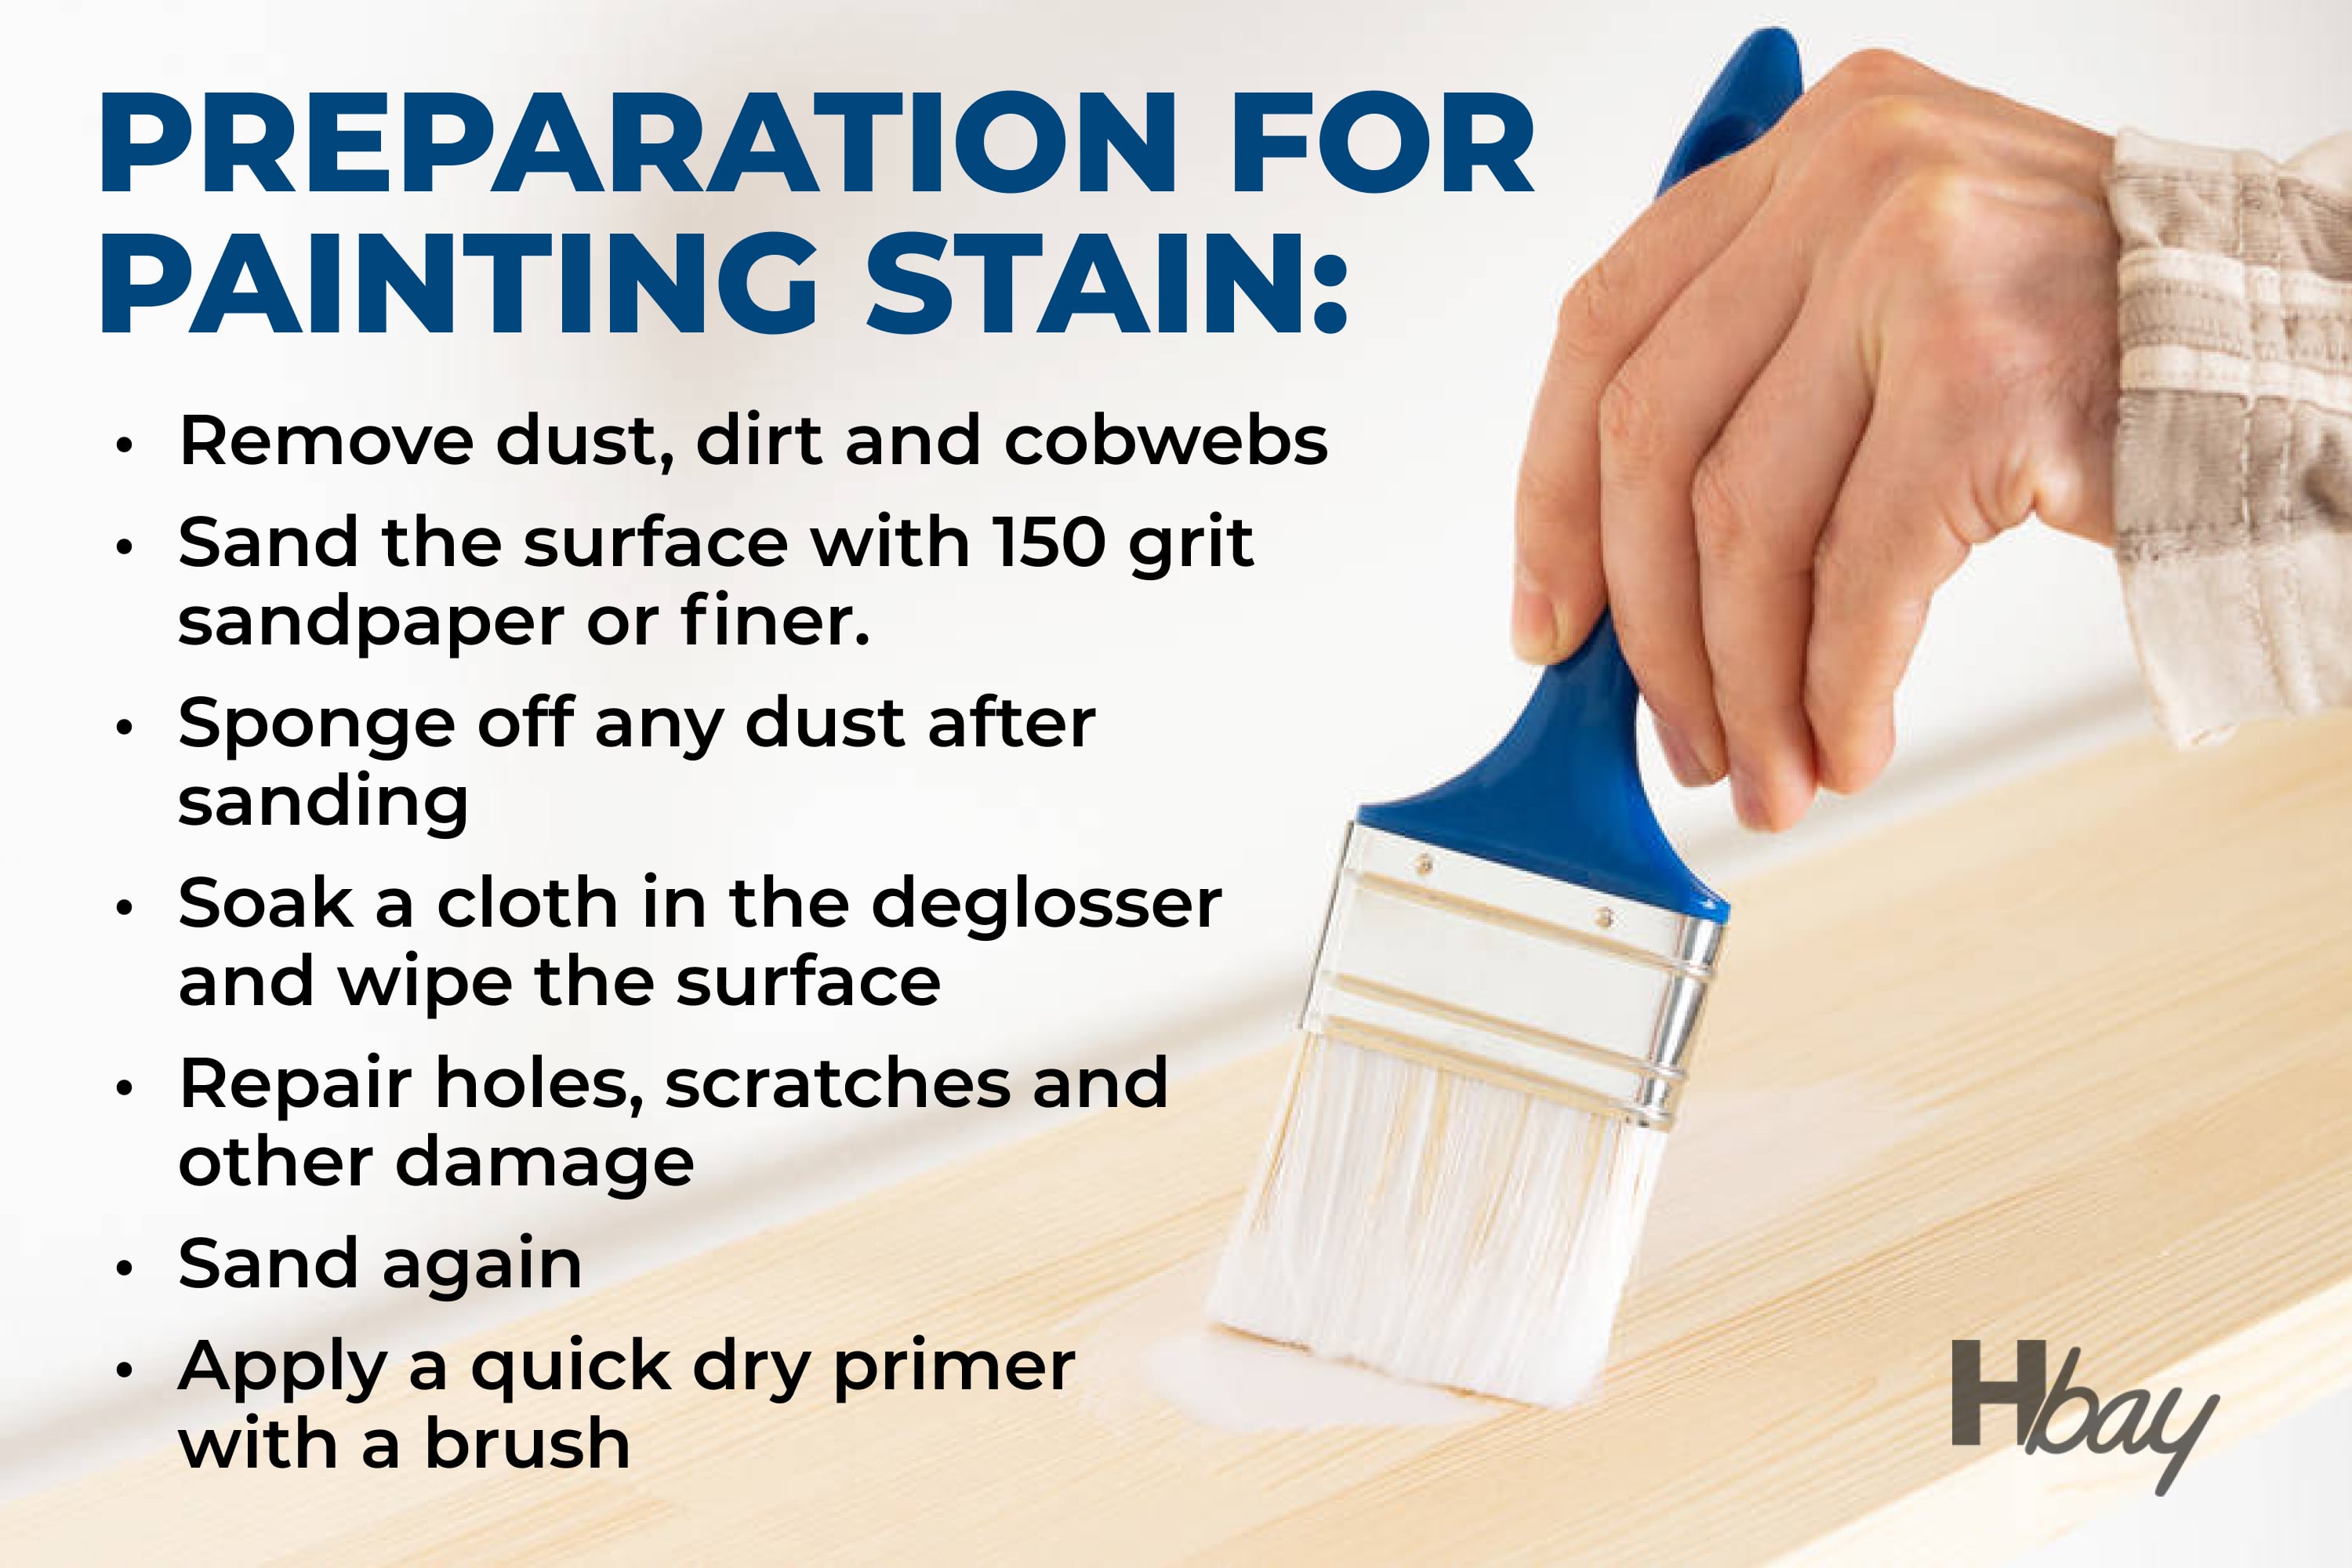 Preparation for painting stain